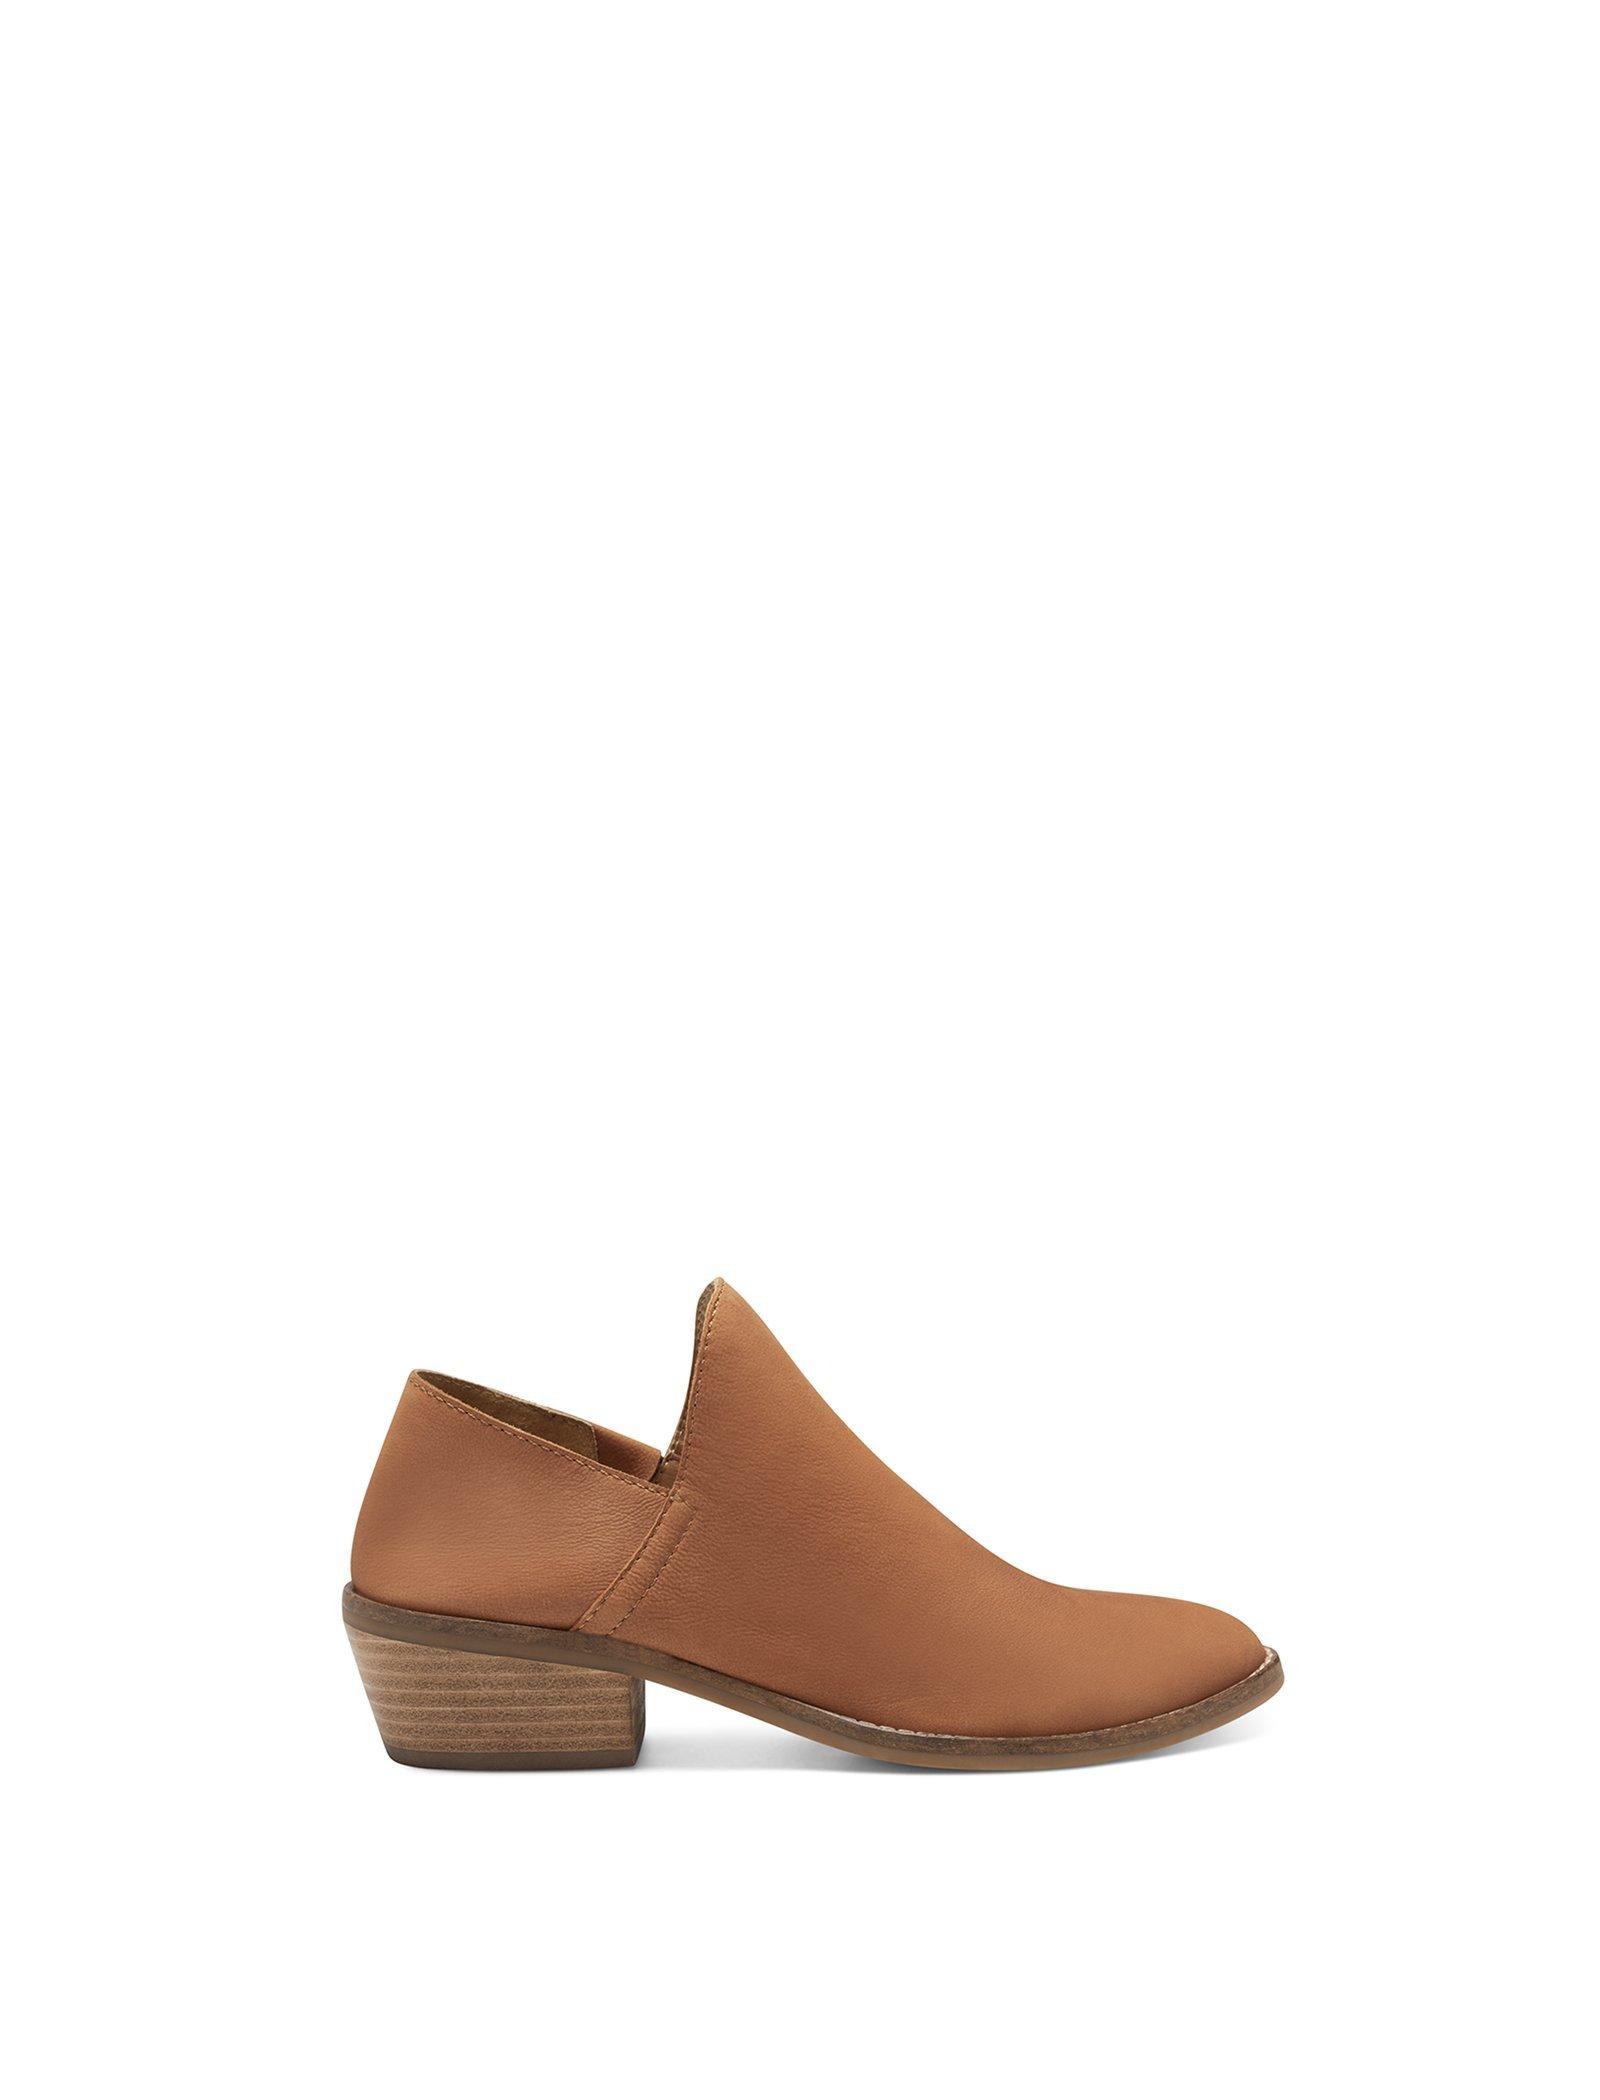 lucky brand ladies shoes